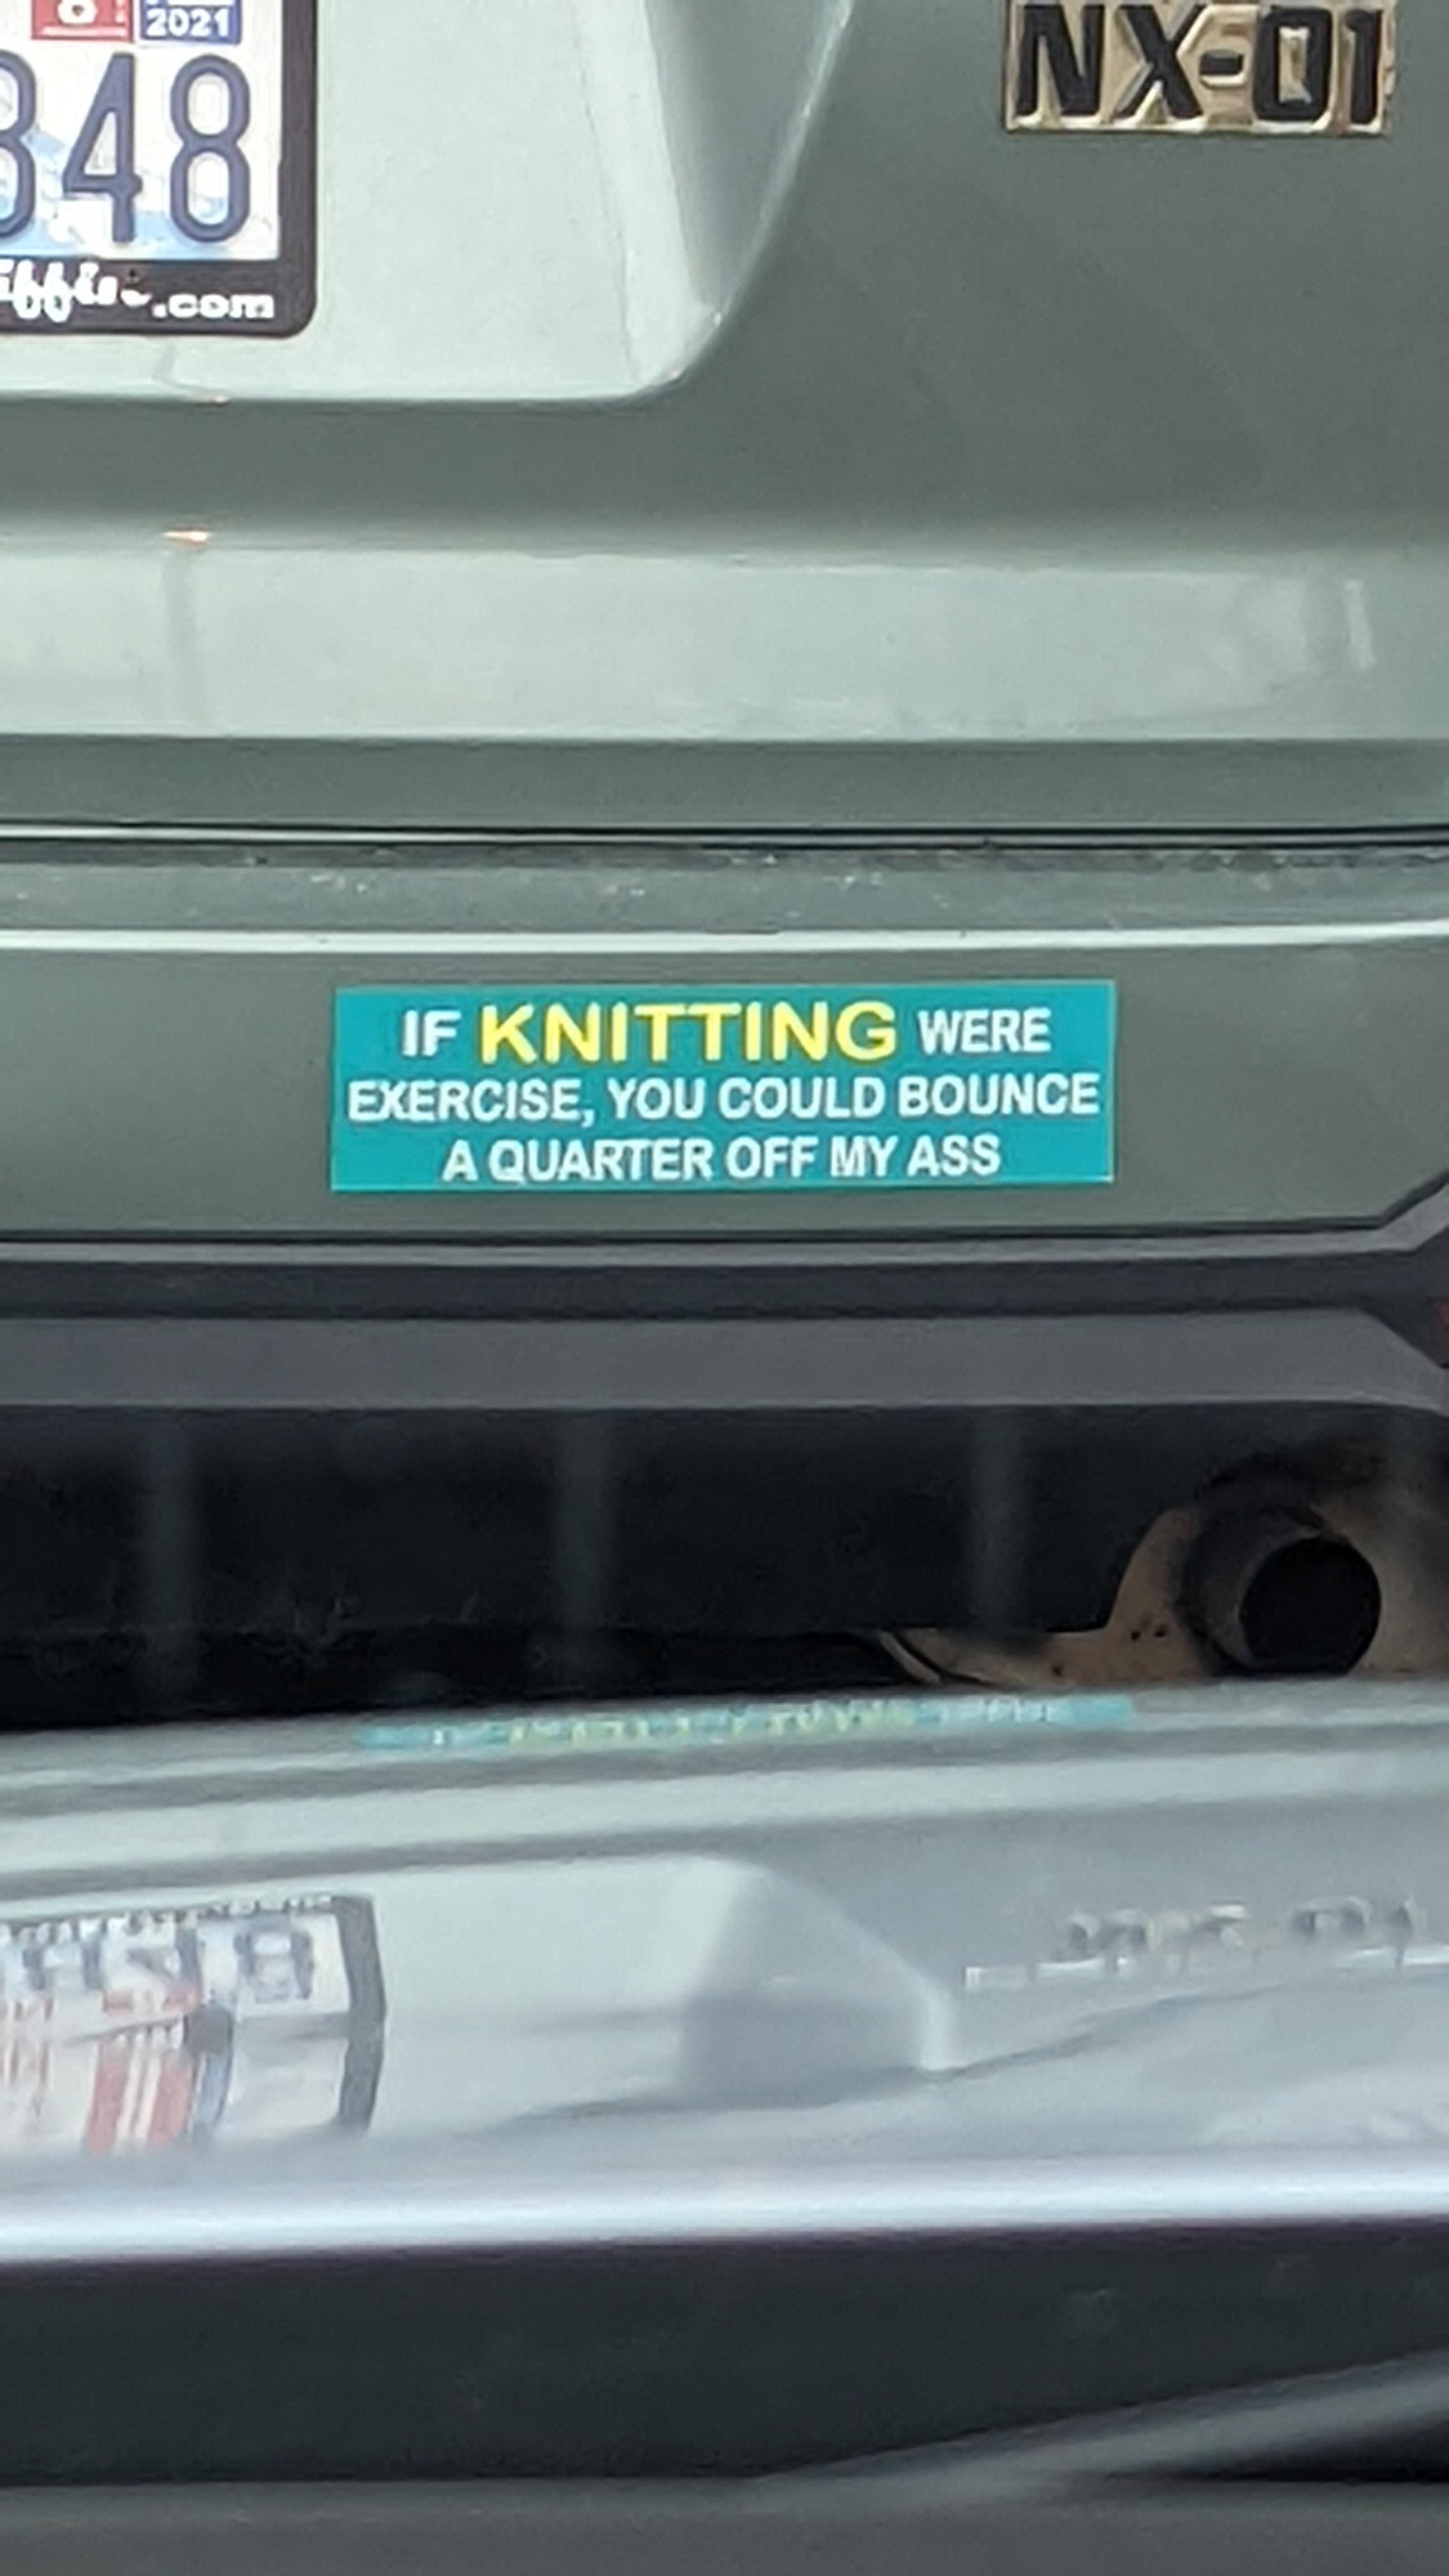 seen on the back of a 70-year-old woman's Subaru Forester